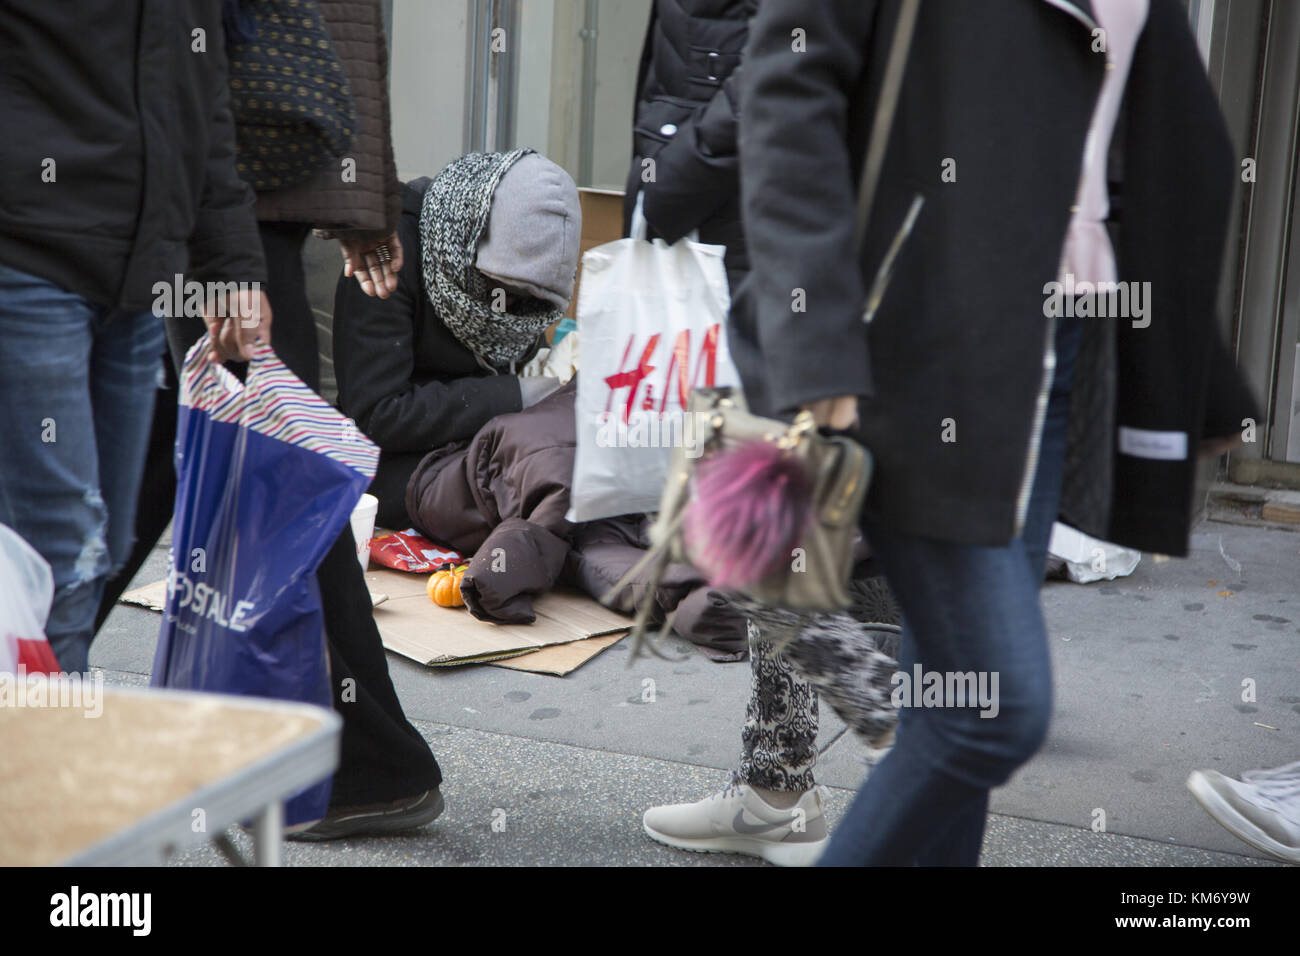 Homeless people share the sidewalks with holiday shoppers in midtown Manhattan on the Black Friday Thanksgiving weekend, marking the official start of the Christmas holiday shopping season. Stock Photo